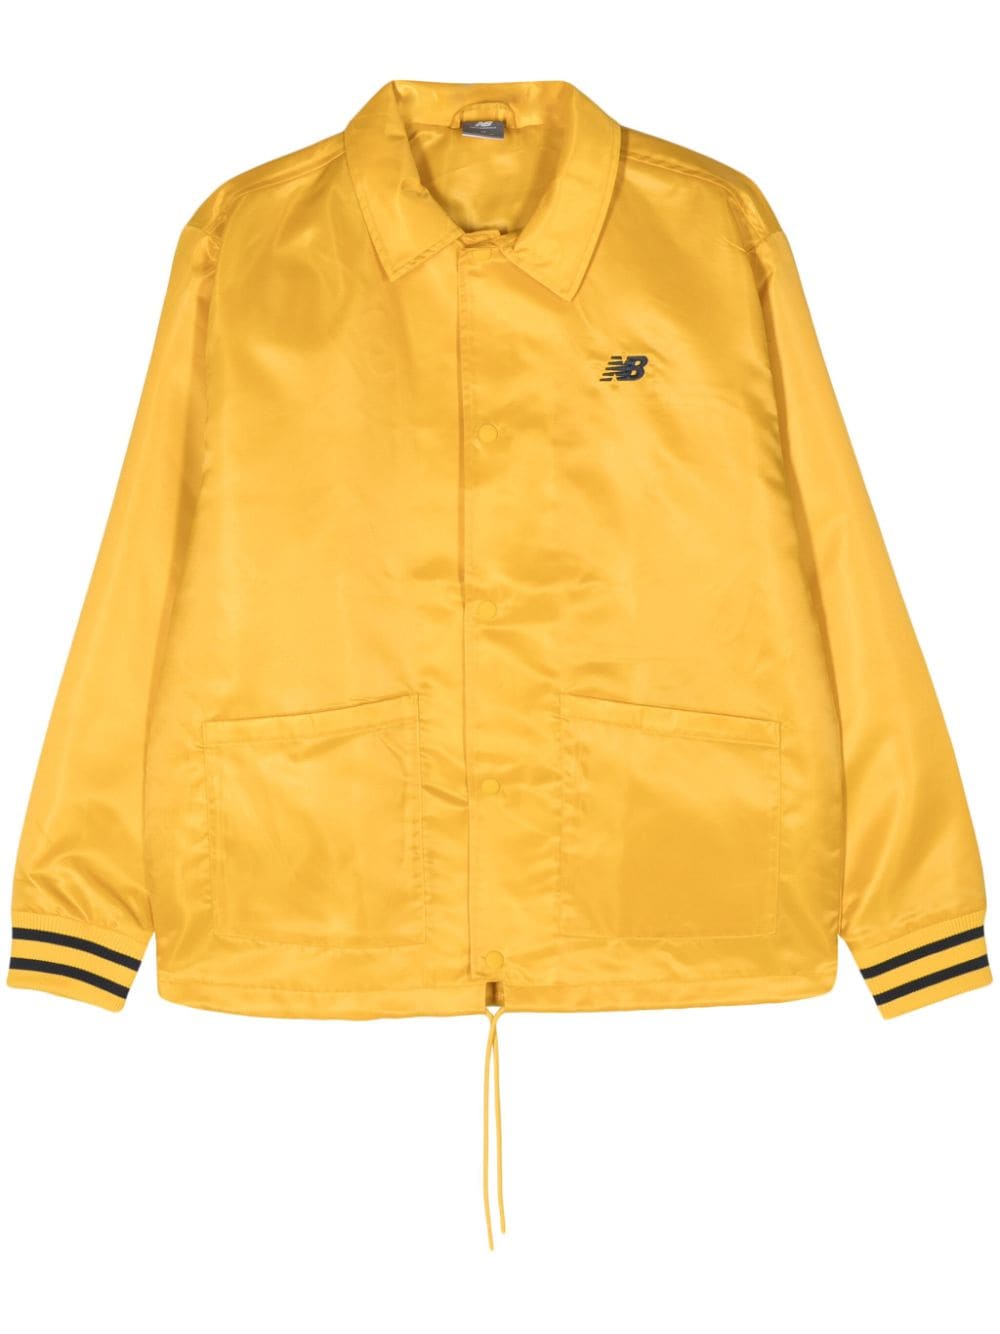 New Balance Greatest Hits Coaches Bomber Jacket In Yellow